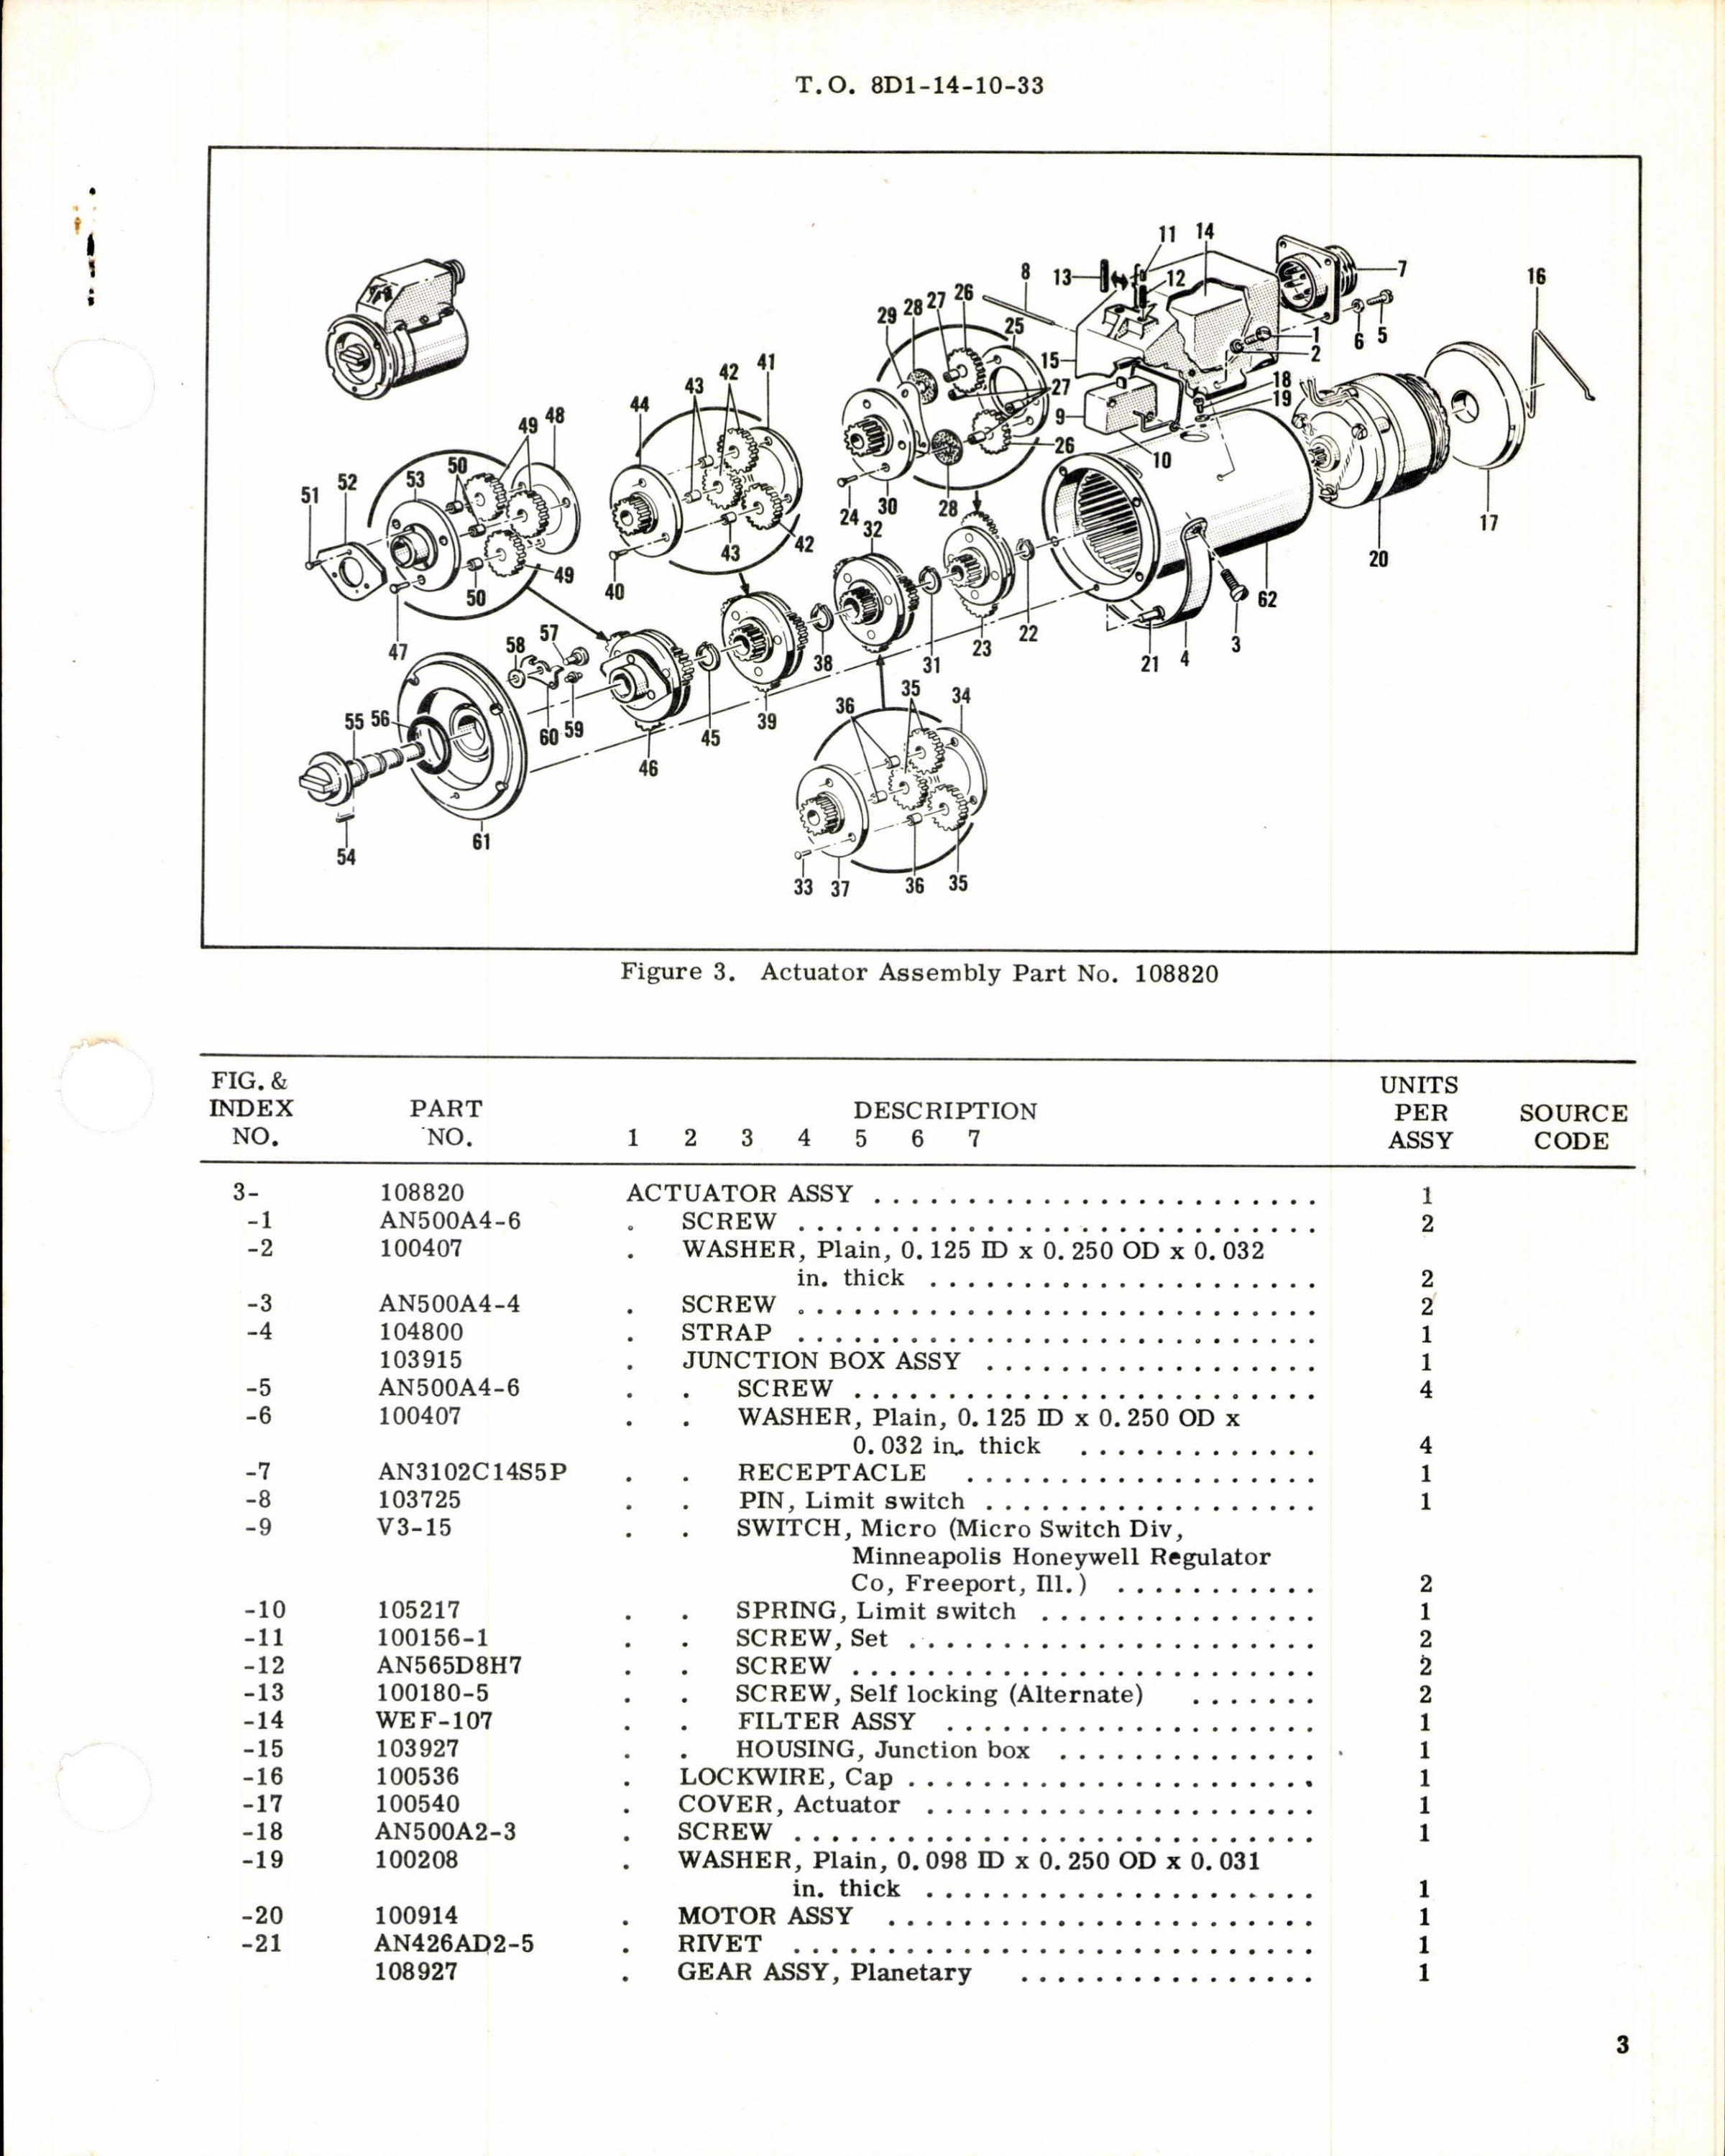 Sample page 3 from AirCorps Library document: Instructions w Parts Breakdown for Actuator Assembly Part 108820